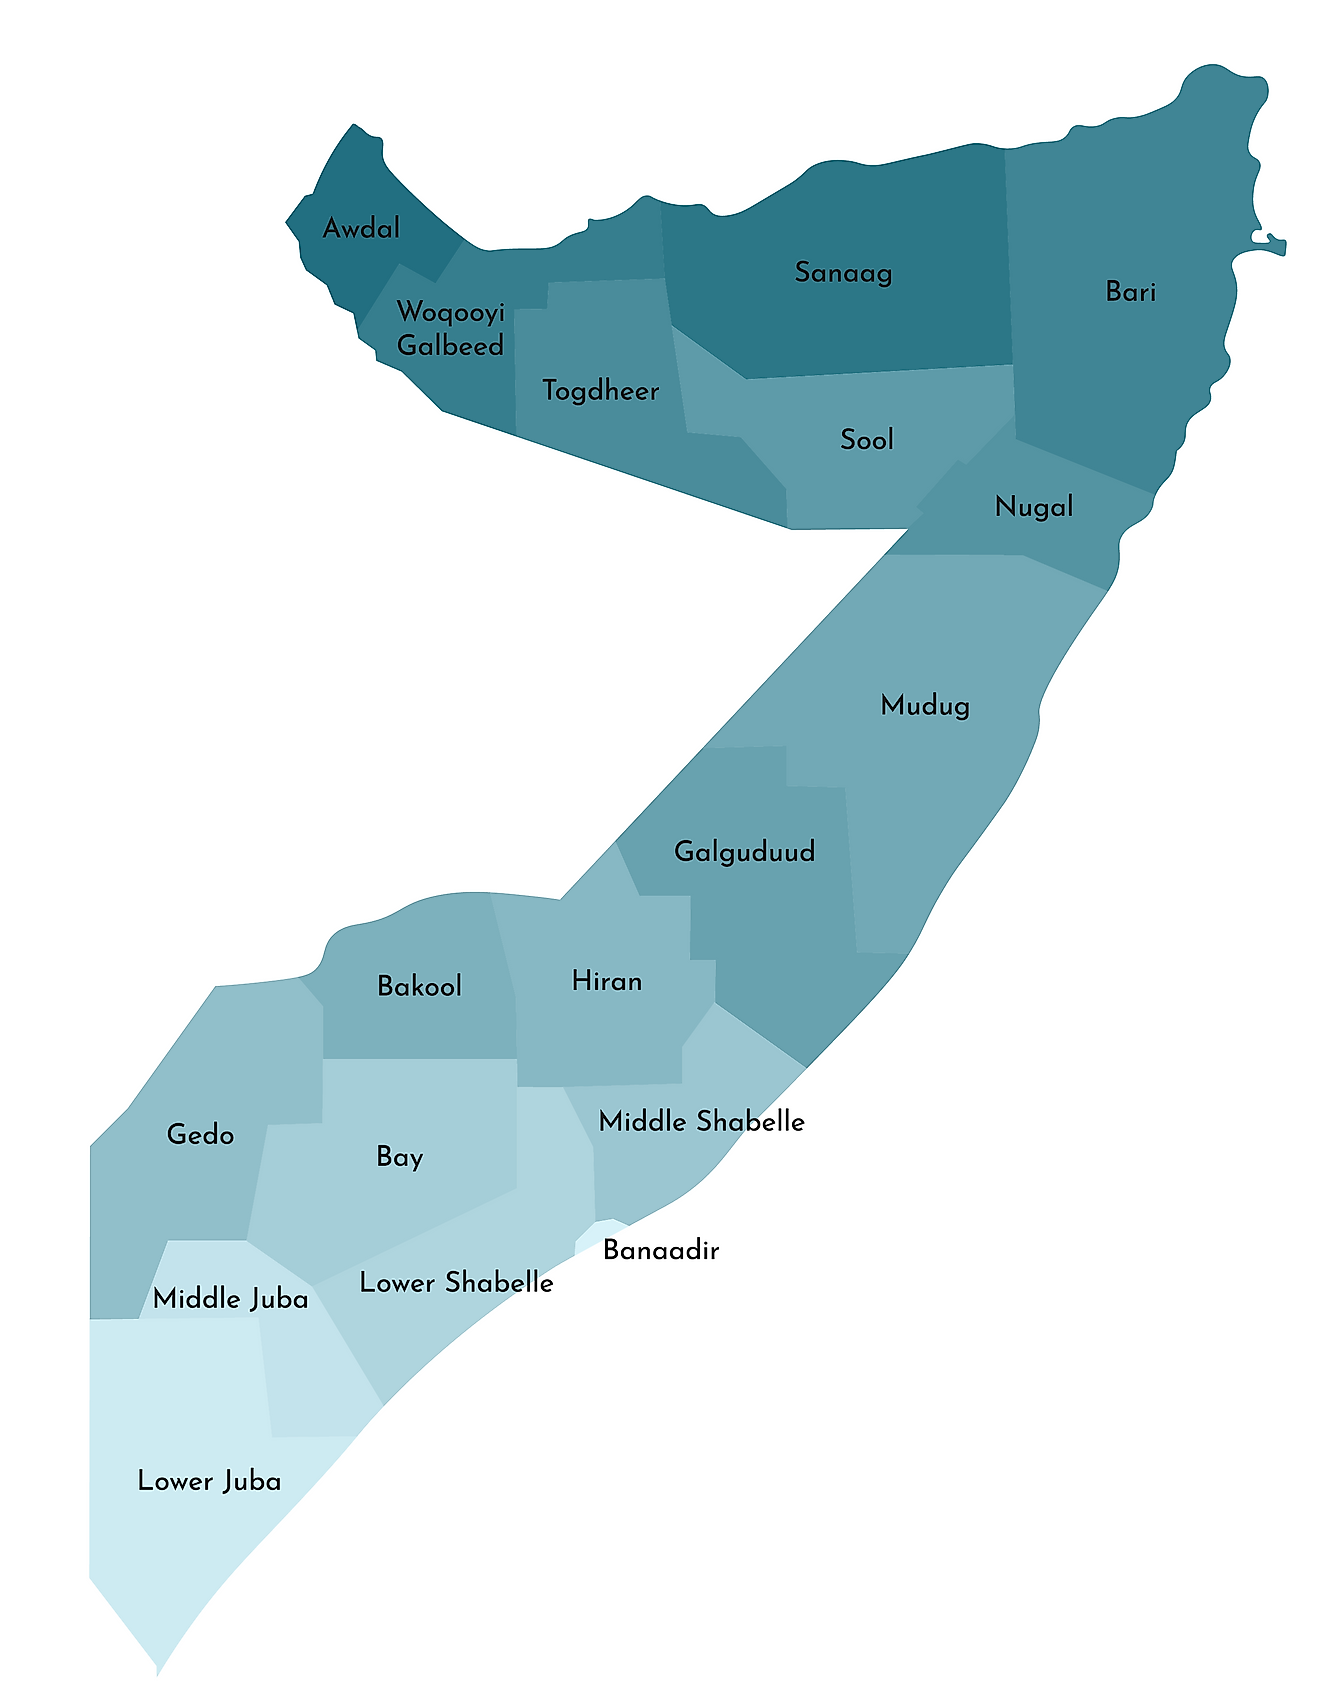 Political Map of Somalia showing the eighteen regions of the country, their capitals, and the national capital of Mogadishu.